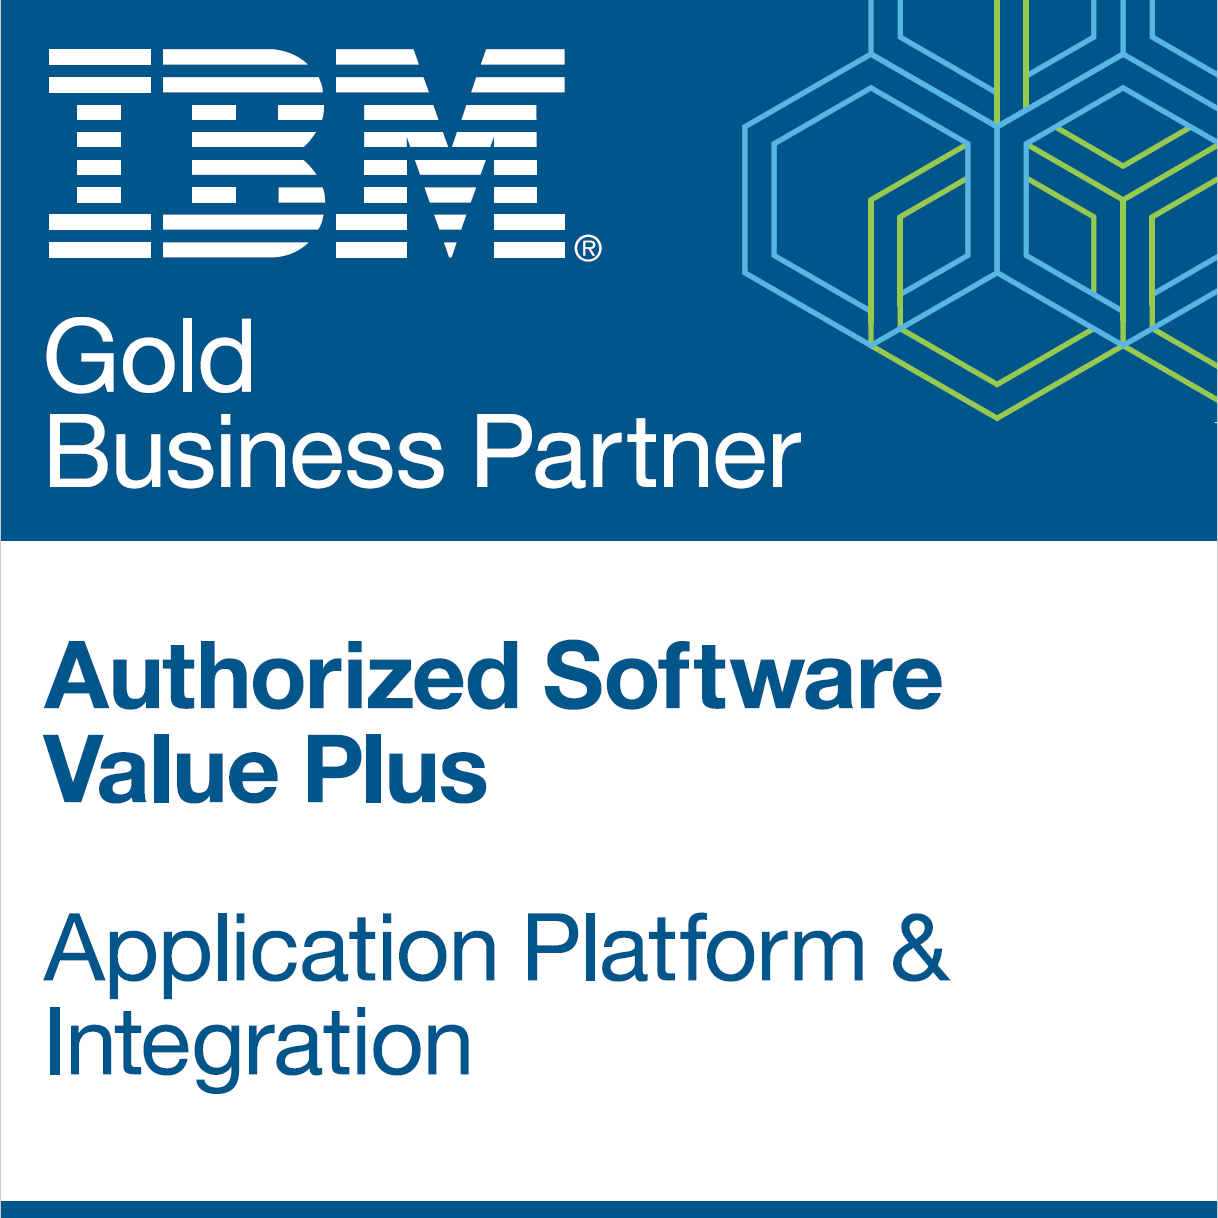 ABS is a IBM Gold Business Partner and software reseller...